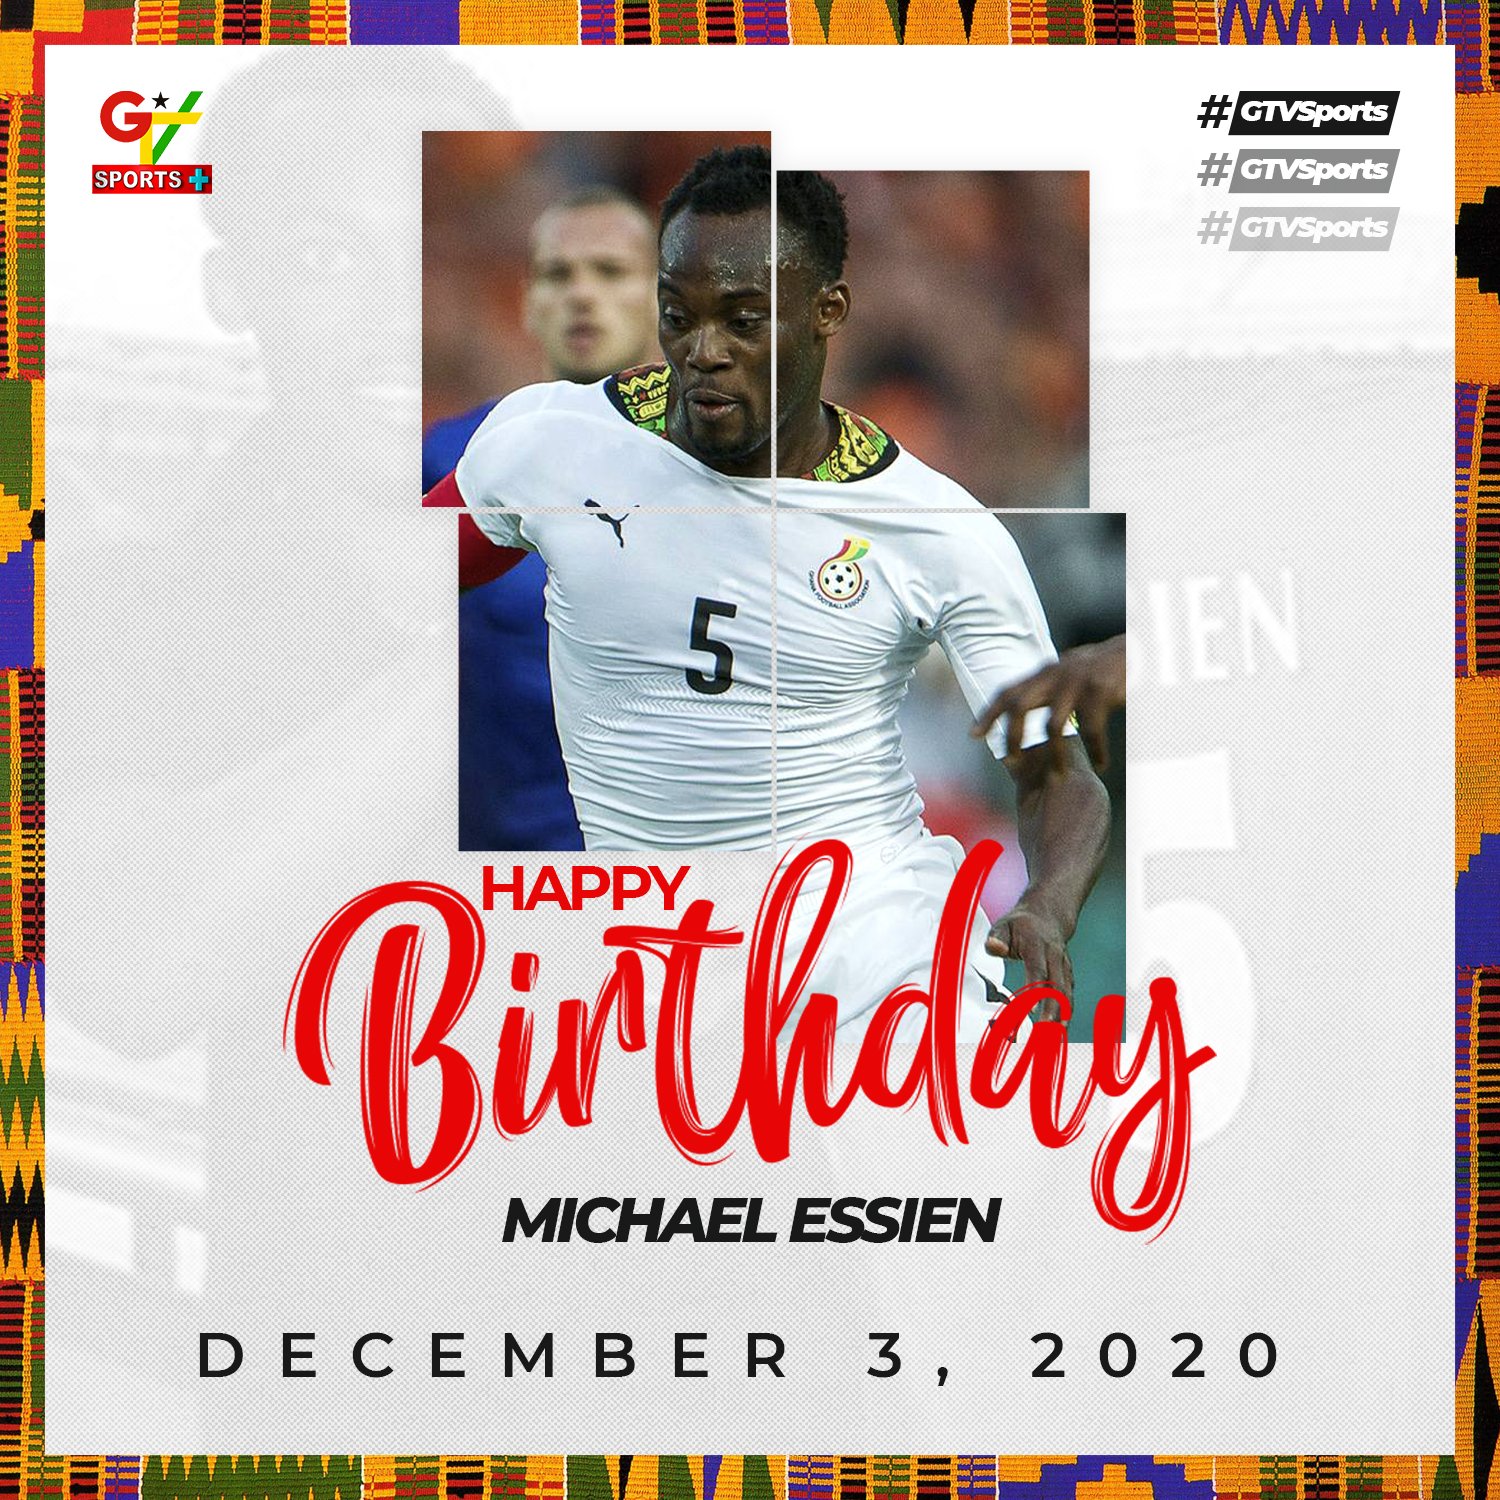 Happy birthday to the former Black Stars player and a Chelsea legend, Michael Essien  